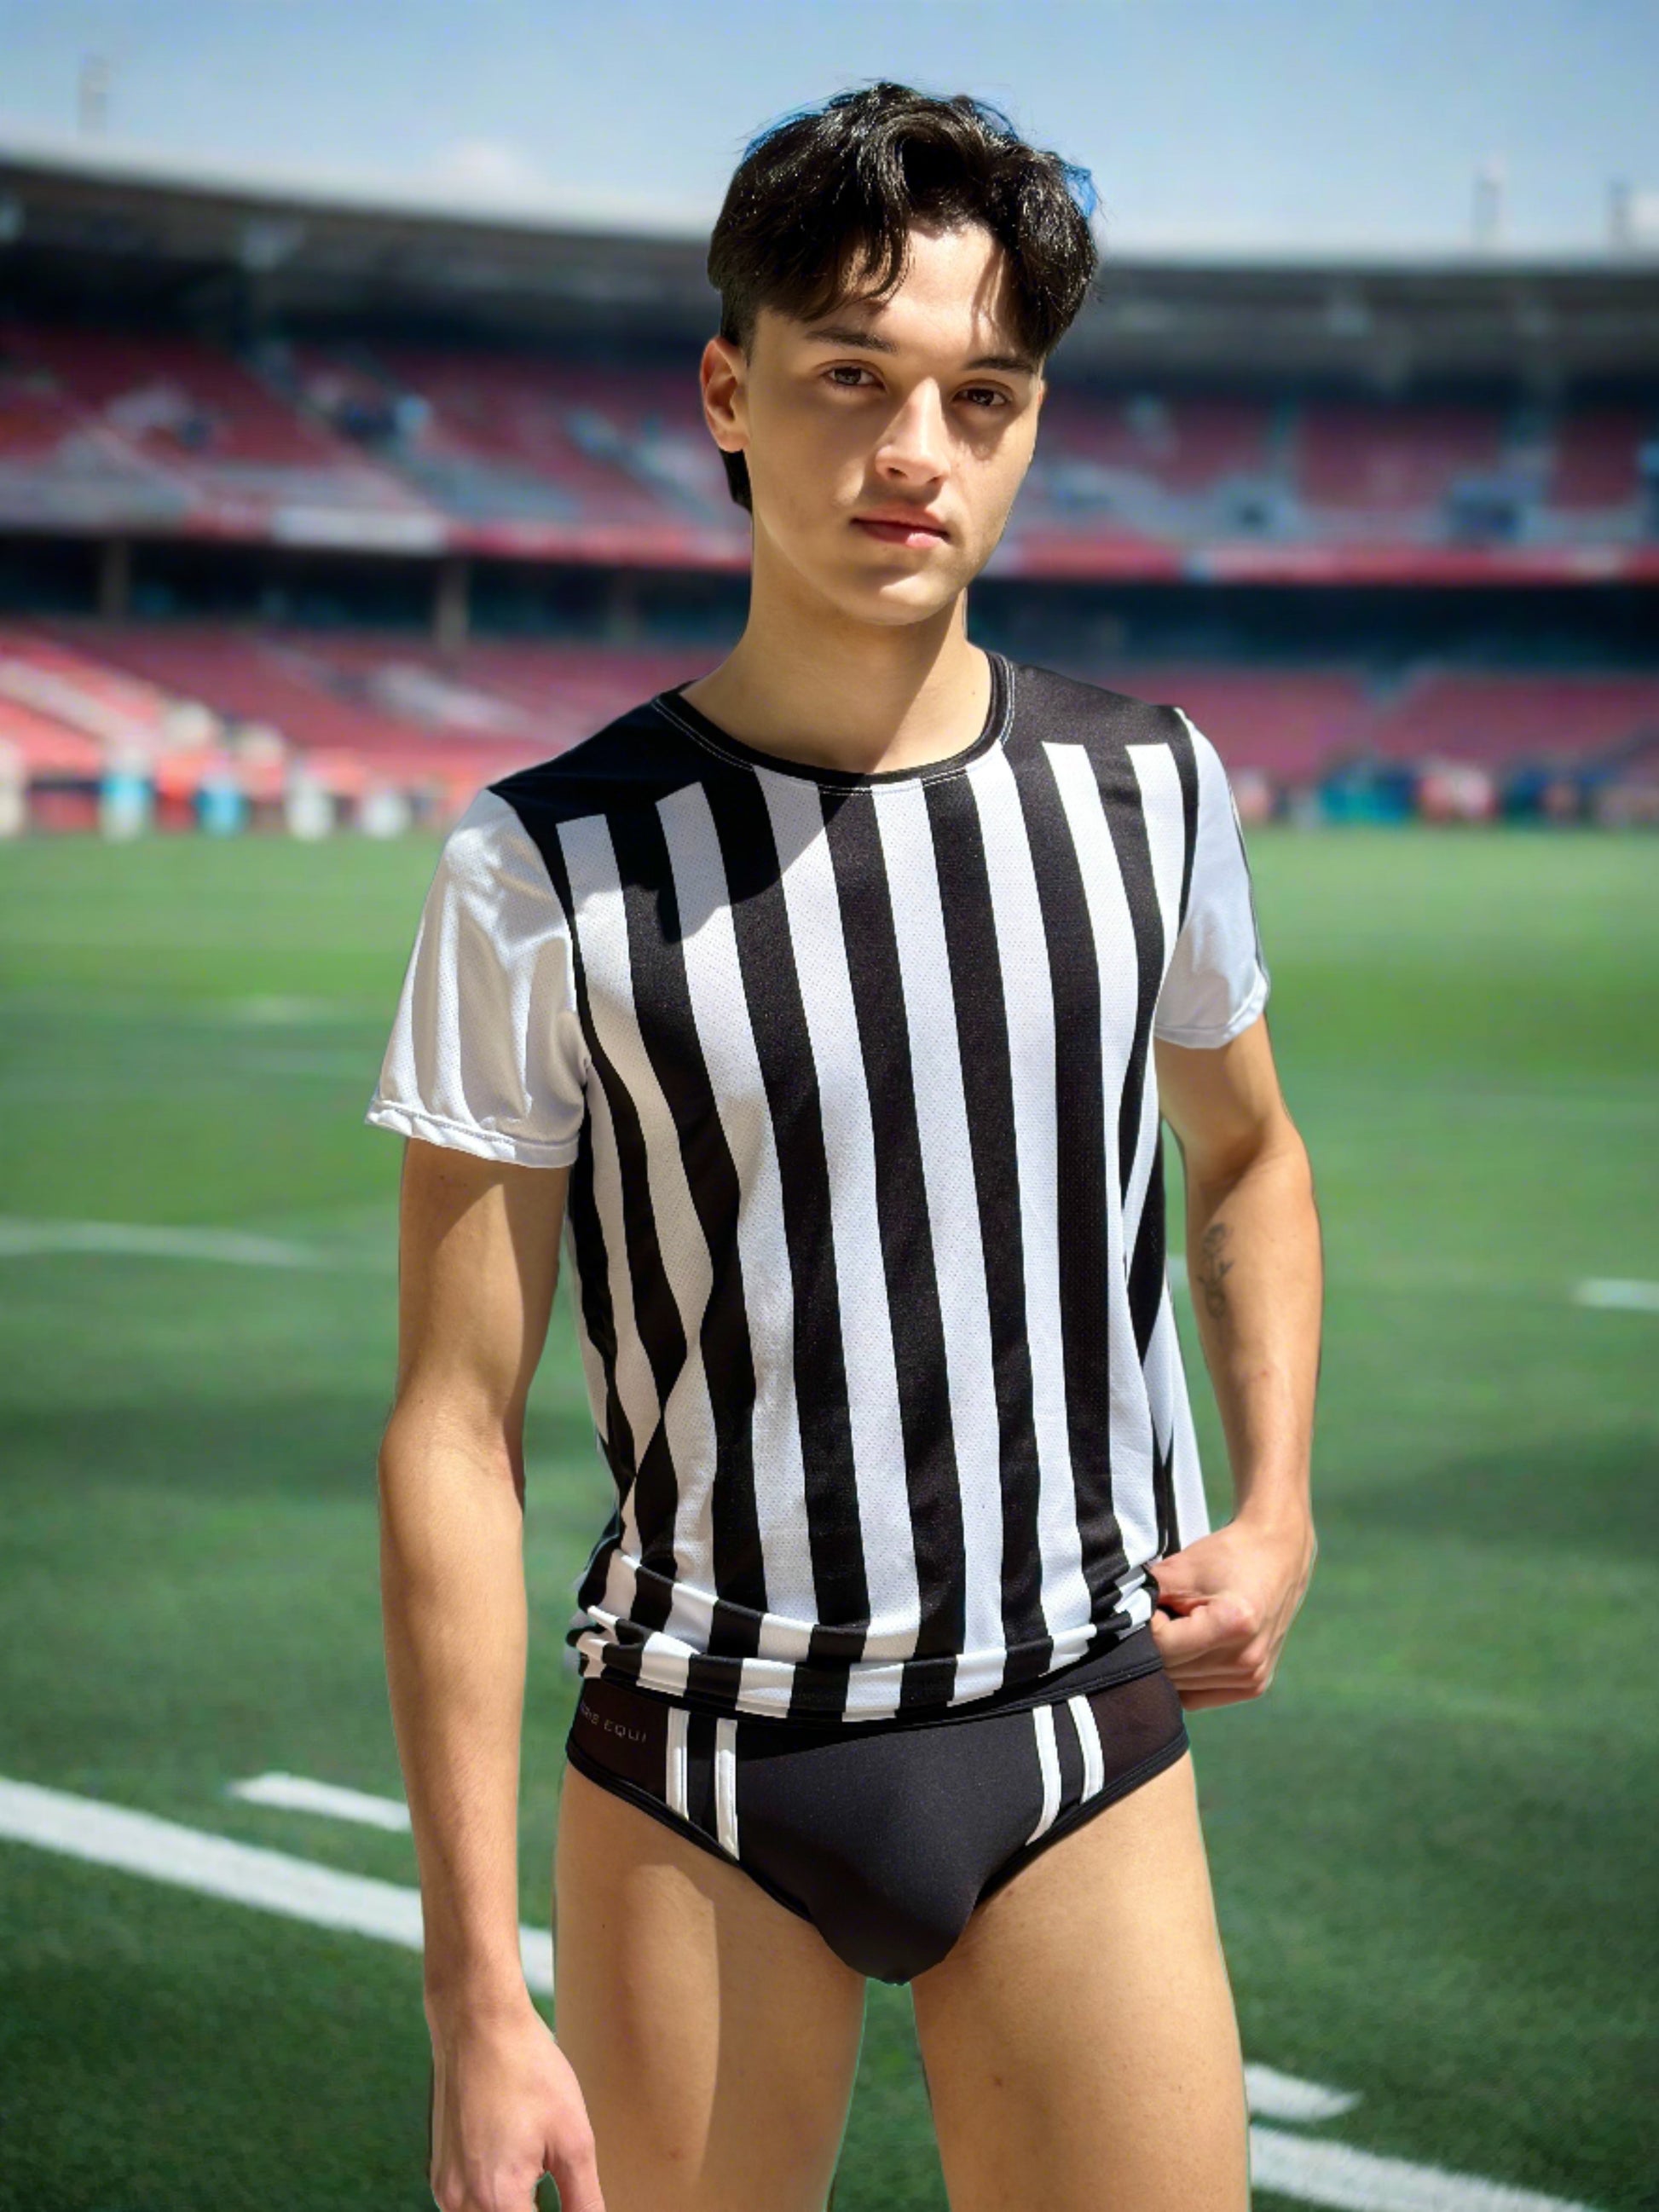 Our Sexy and Daring Referee Swim Brief for Men. Speedo style cut